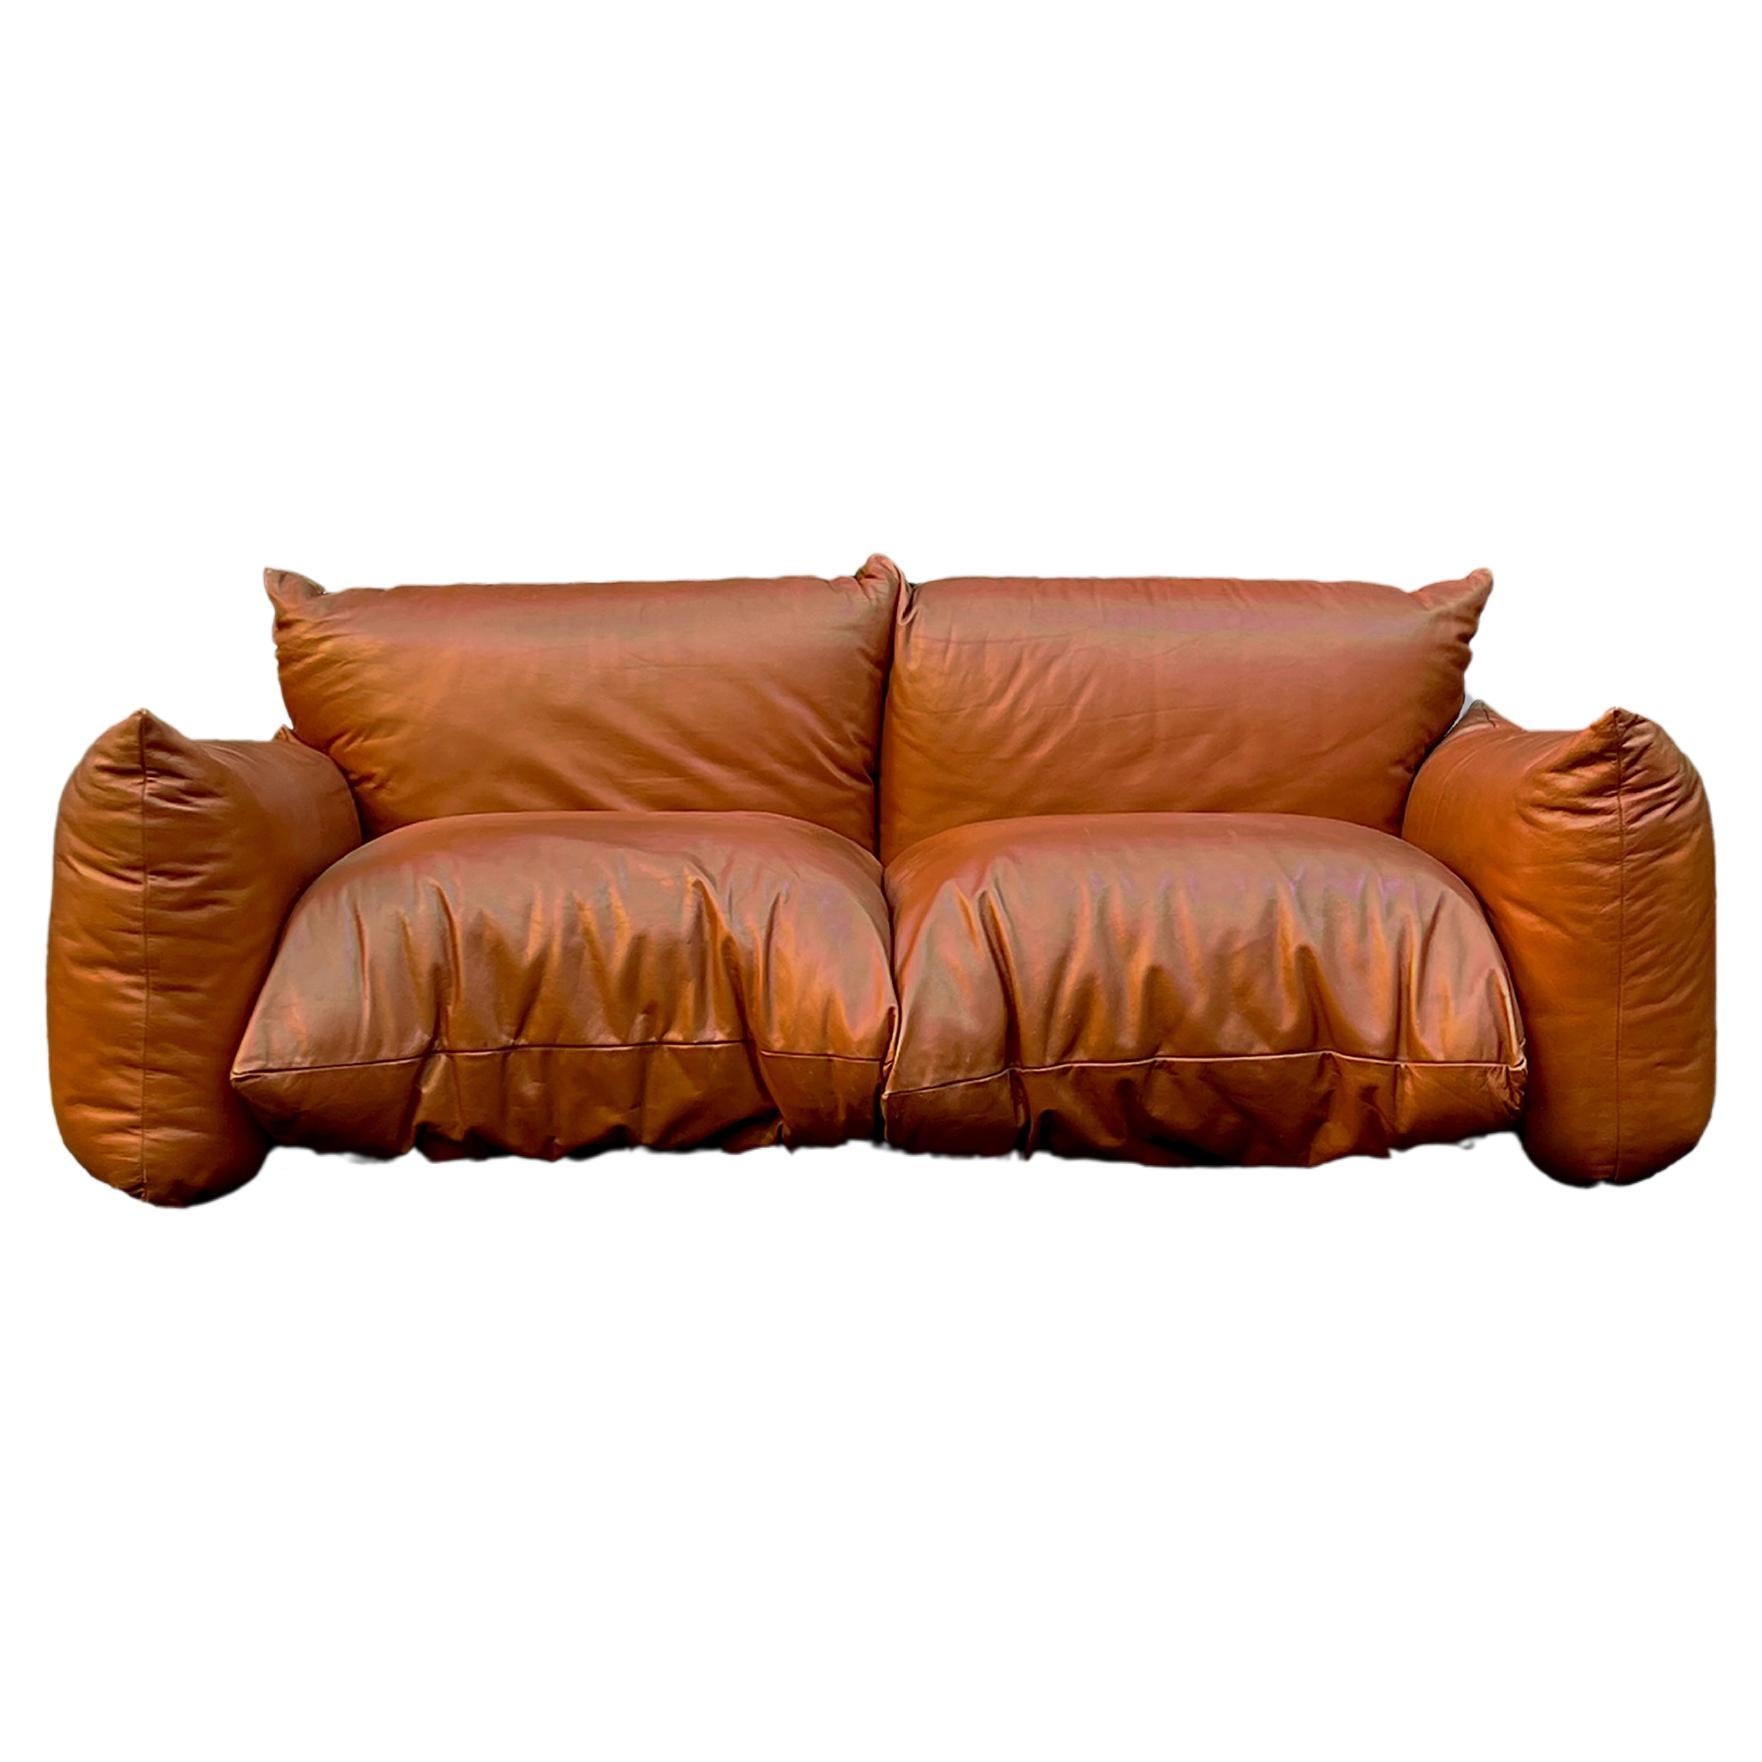 “Marenco” cognac leather sofa designed by Mario Marenco for Arflex, Italy 1970s For Sale